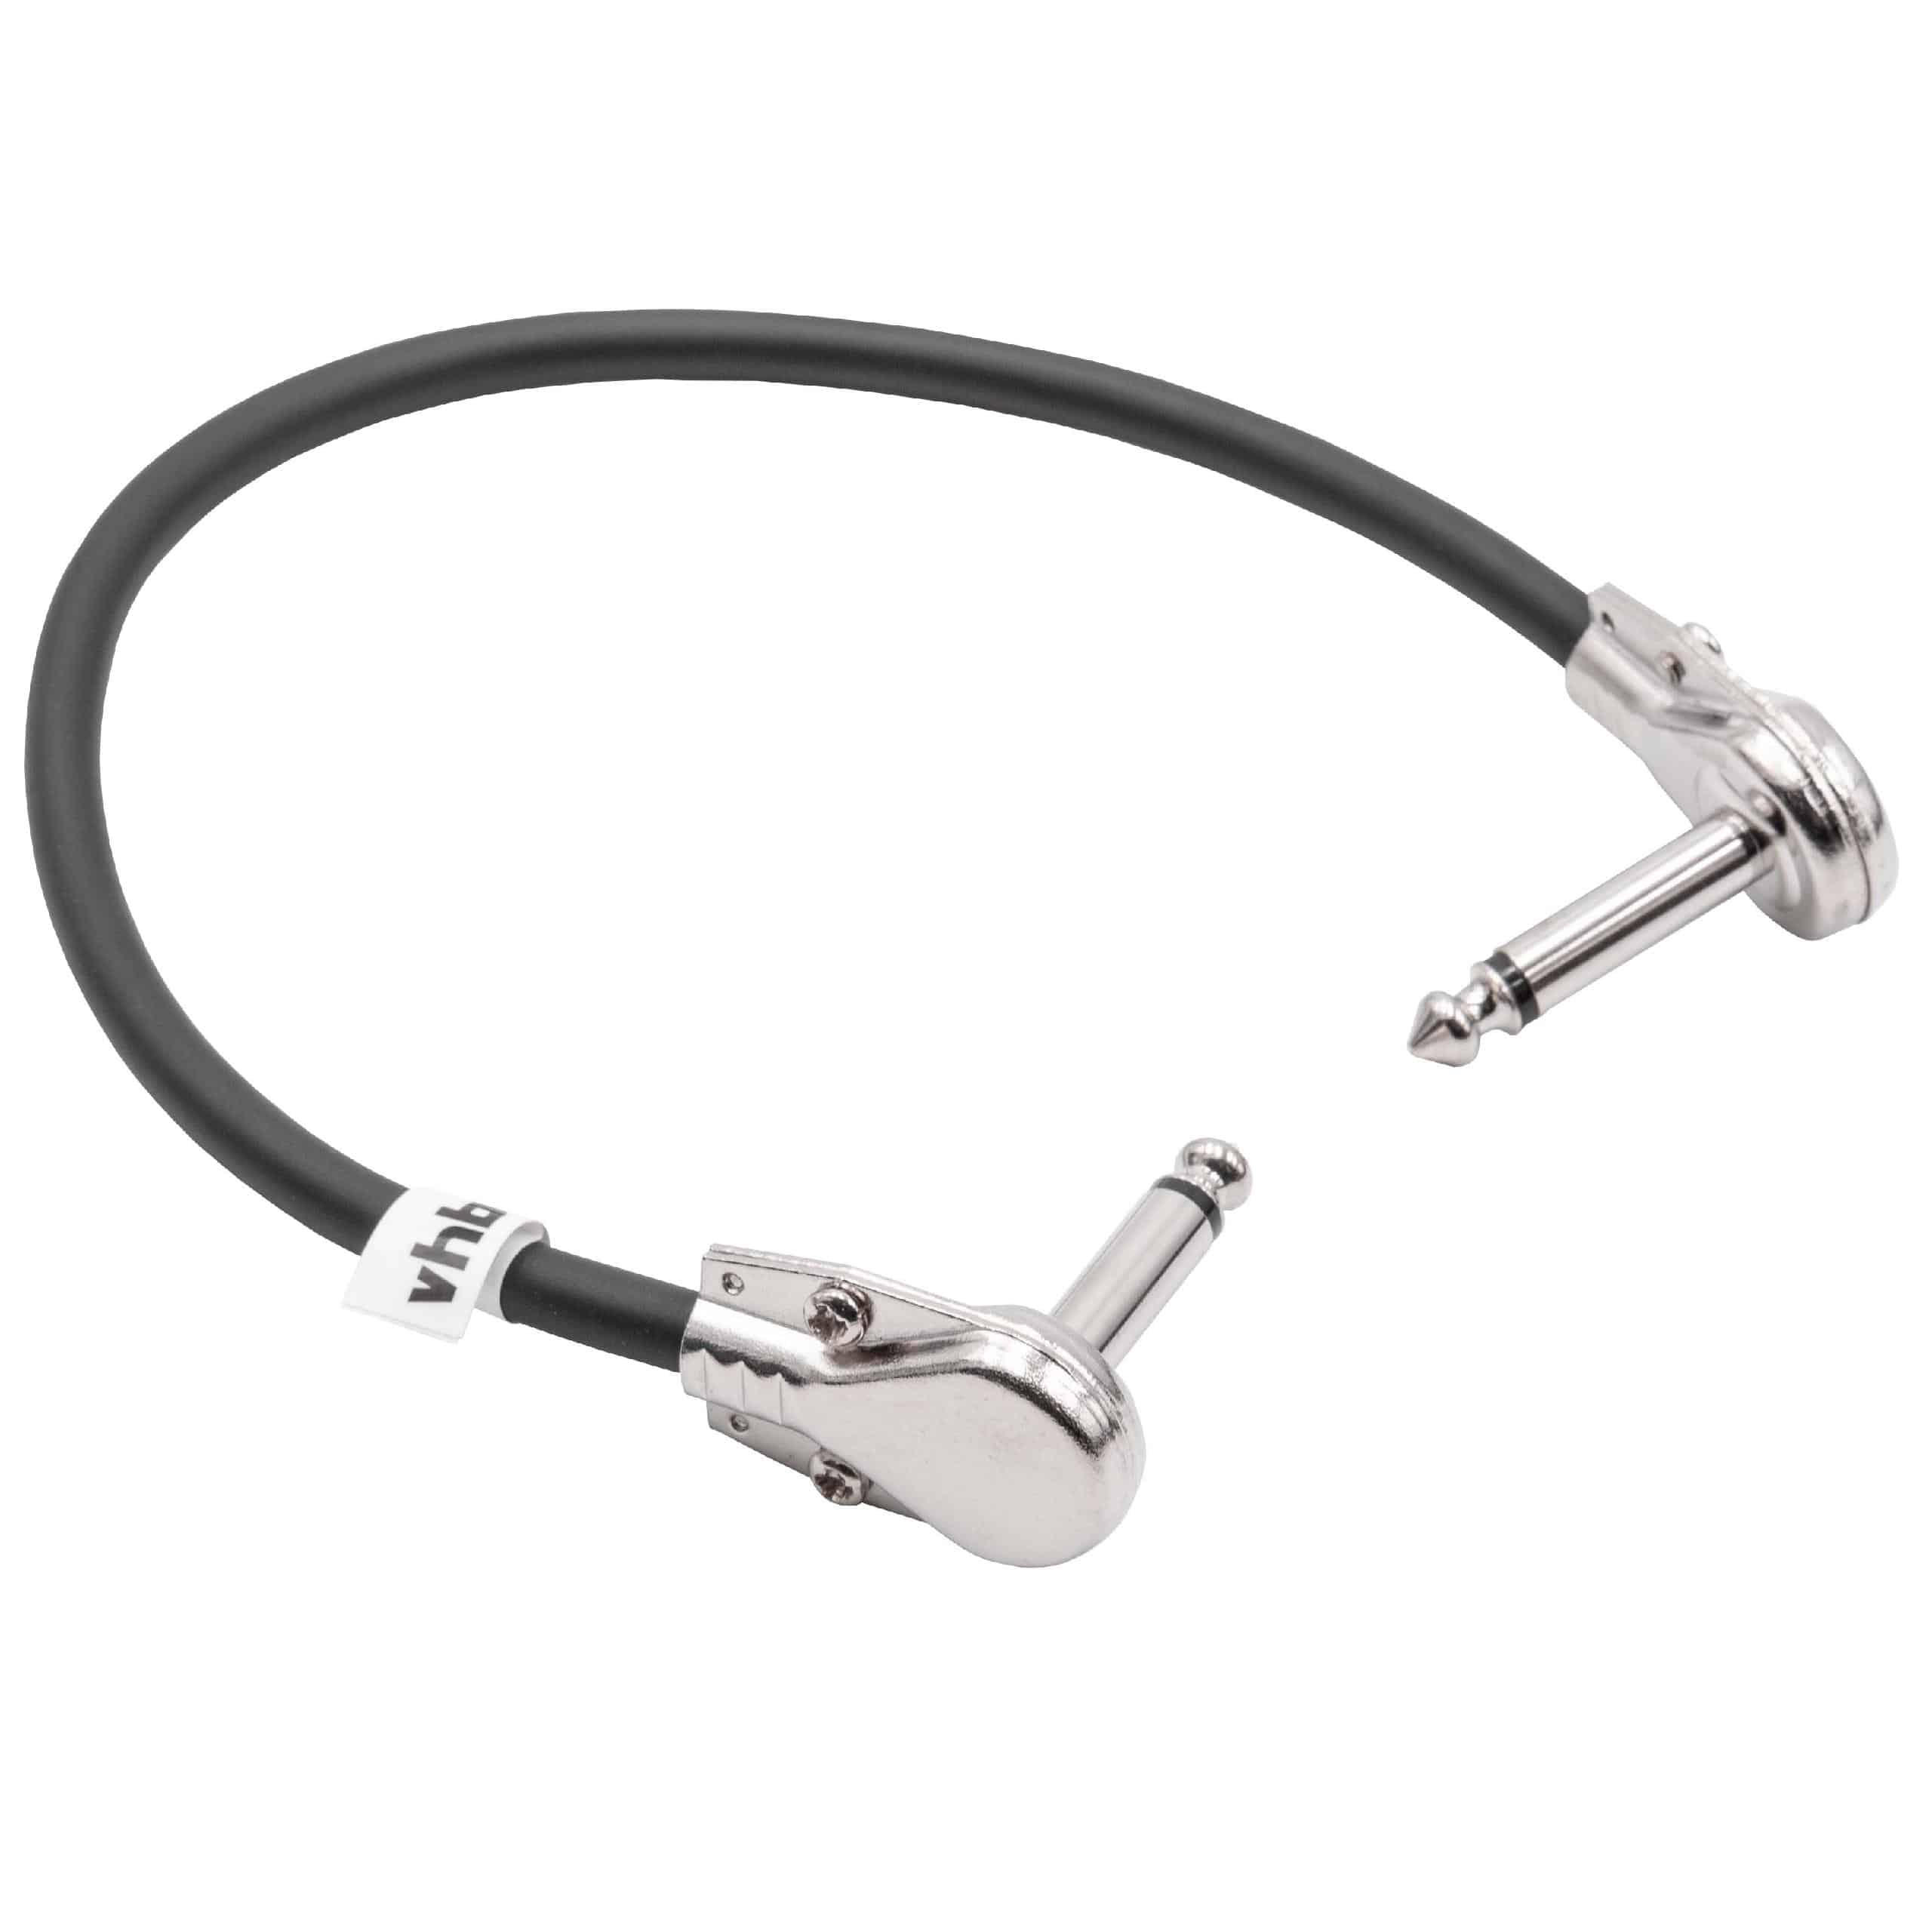 Guitar Patch Cable 30cm Jack Cable for Pedal Board - Patch Cord with 6.3mm Jack Plug, Right Angle, Flat, black